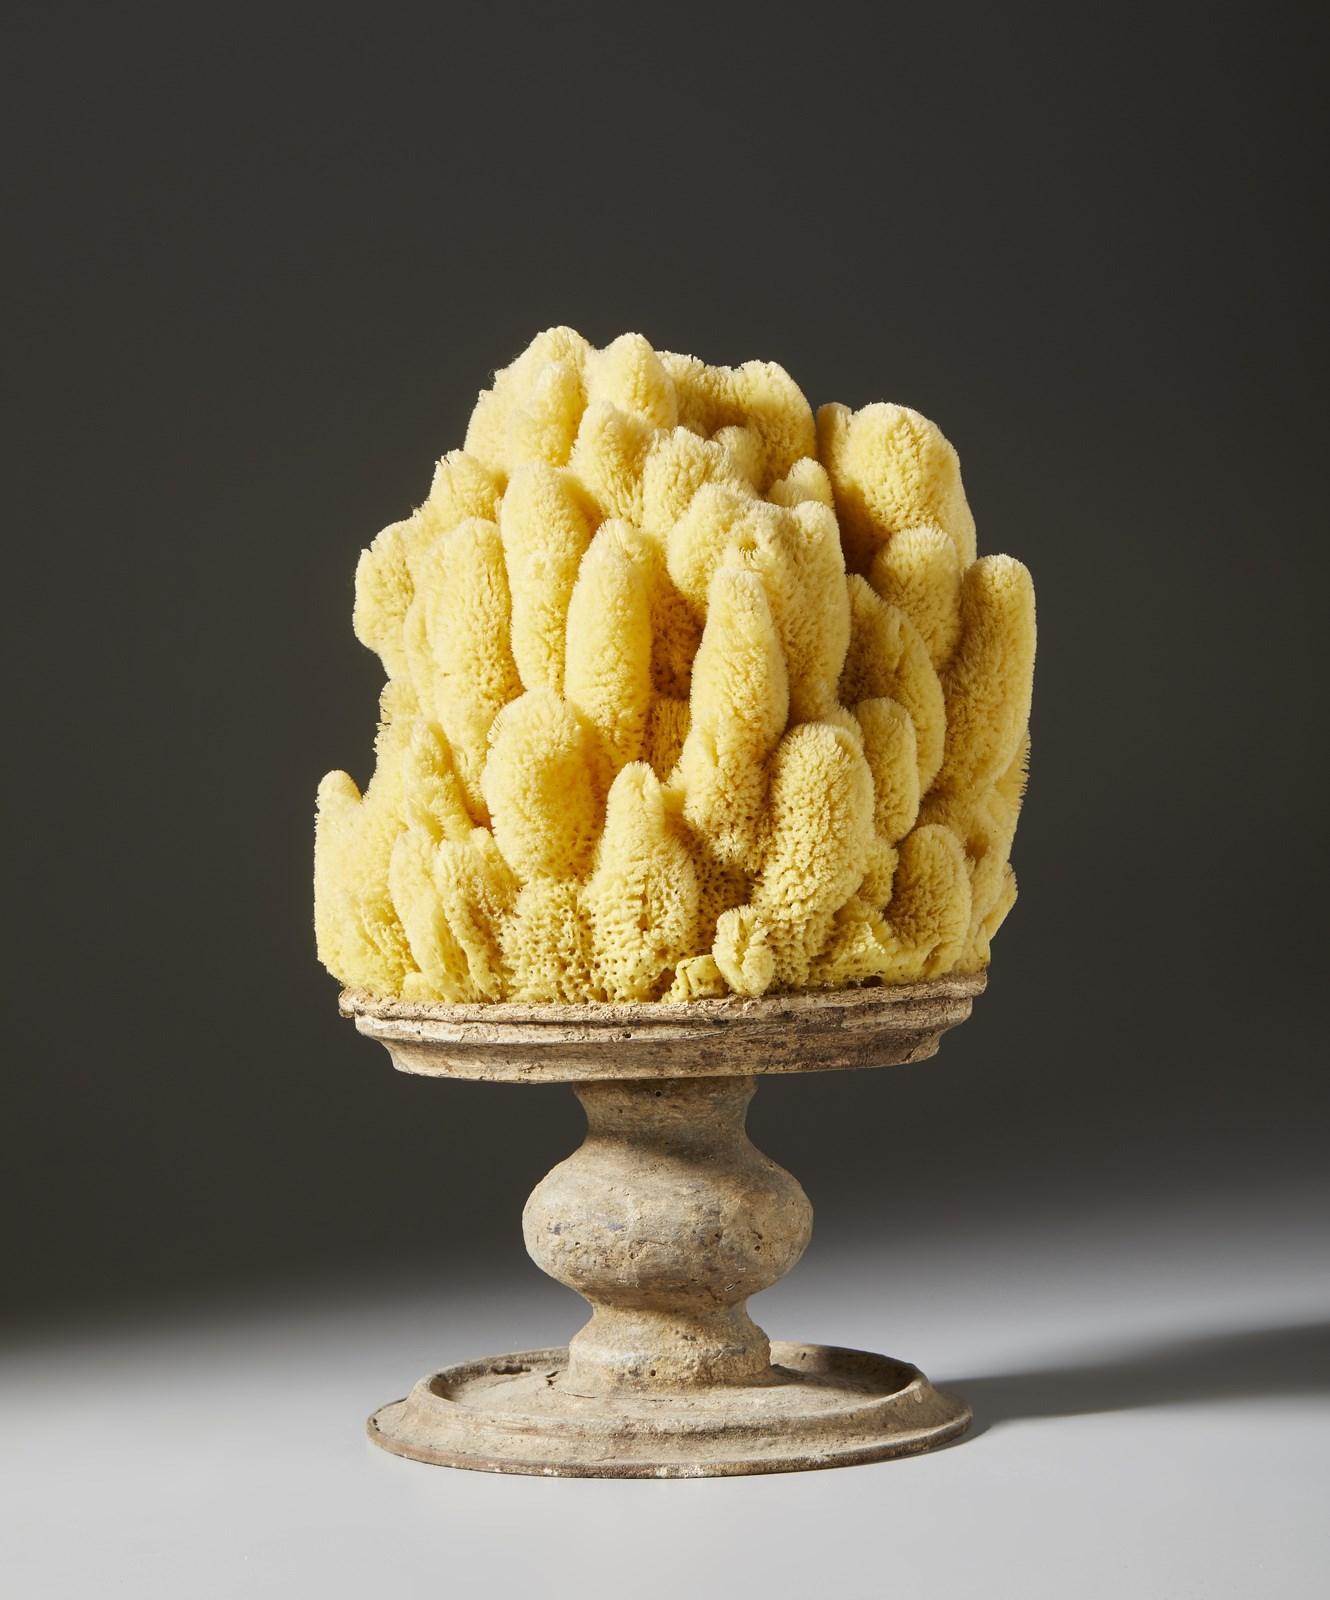 A yellow marine sponge fixed to an antique socle. The yellow marine sponge, or aplysina fistularis, often called the ‘yellow candle sponge,’ is here appropriately fixed to and antique plinth, probably once a candlestick. From an Italian collection.